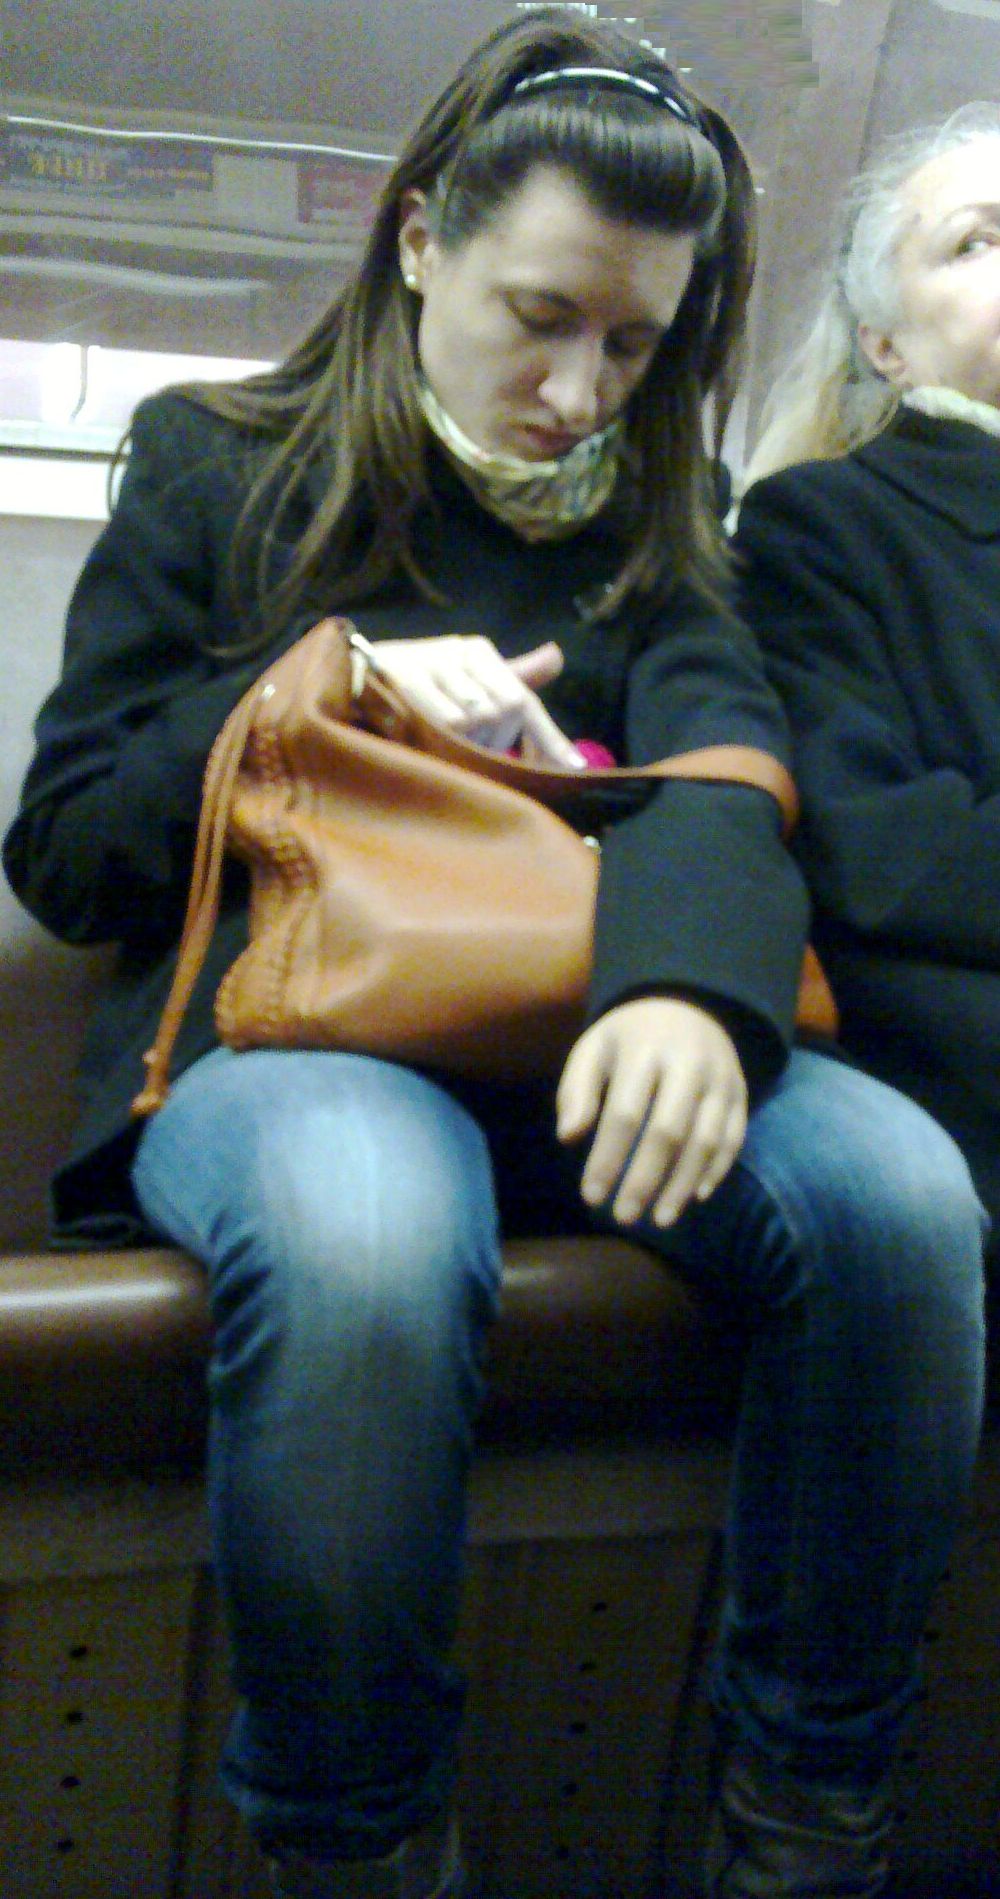 girl-without-hand-on-a-train-2.jpg